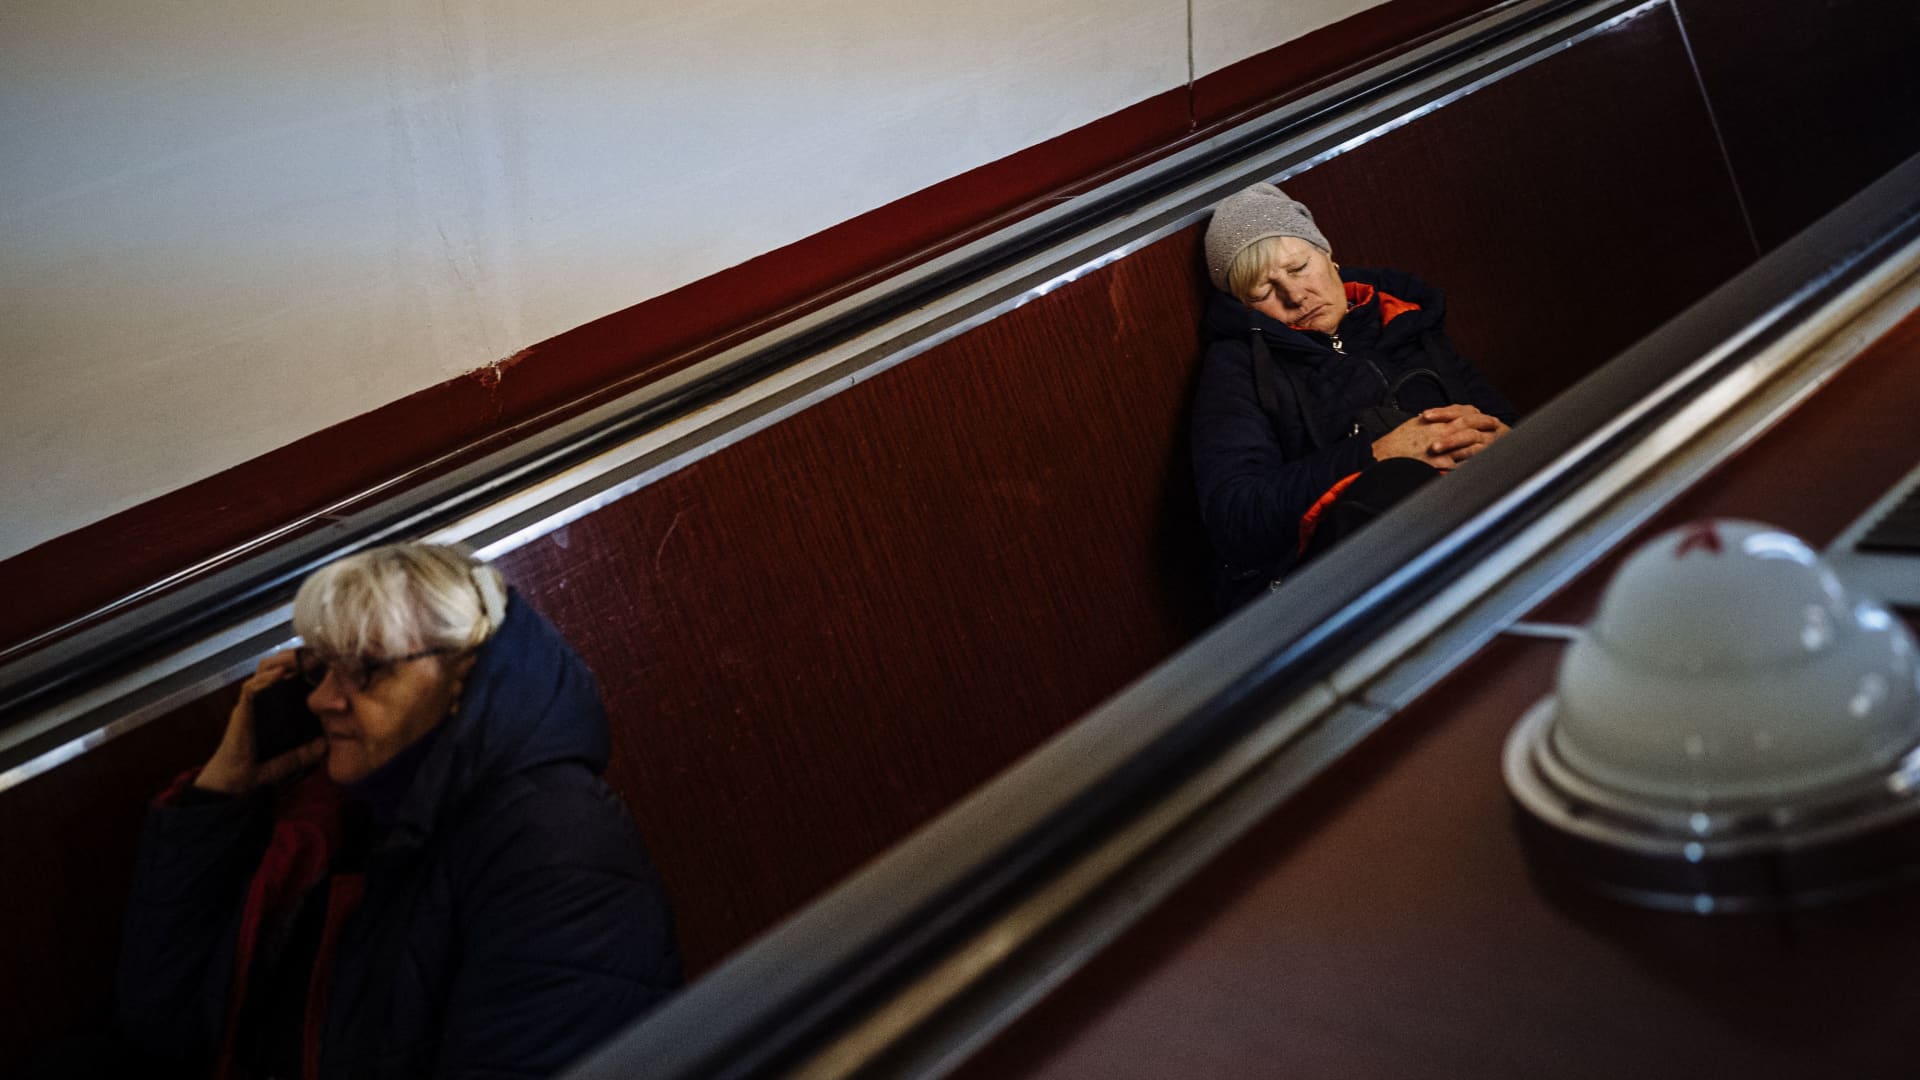 Civilians take shelter in a metro station during an airstrike alert in the centre of Kyiv on December 5, 2022, amid the Russian invasion of Ukraine.